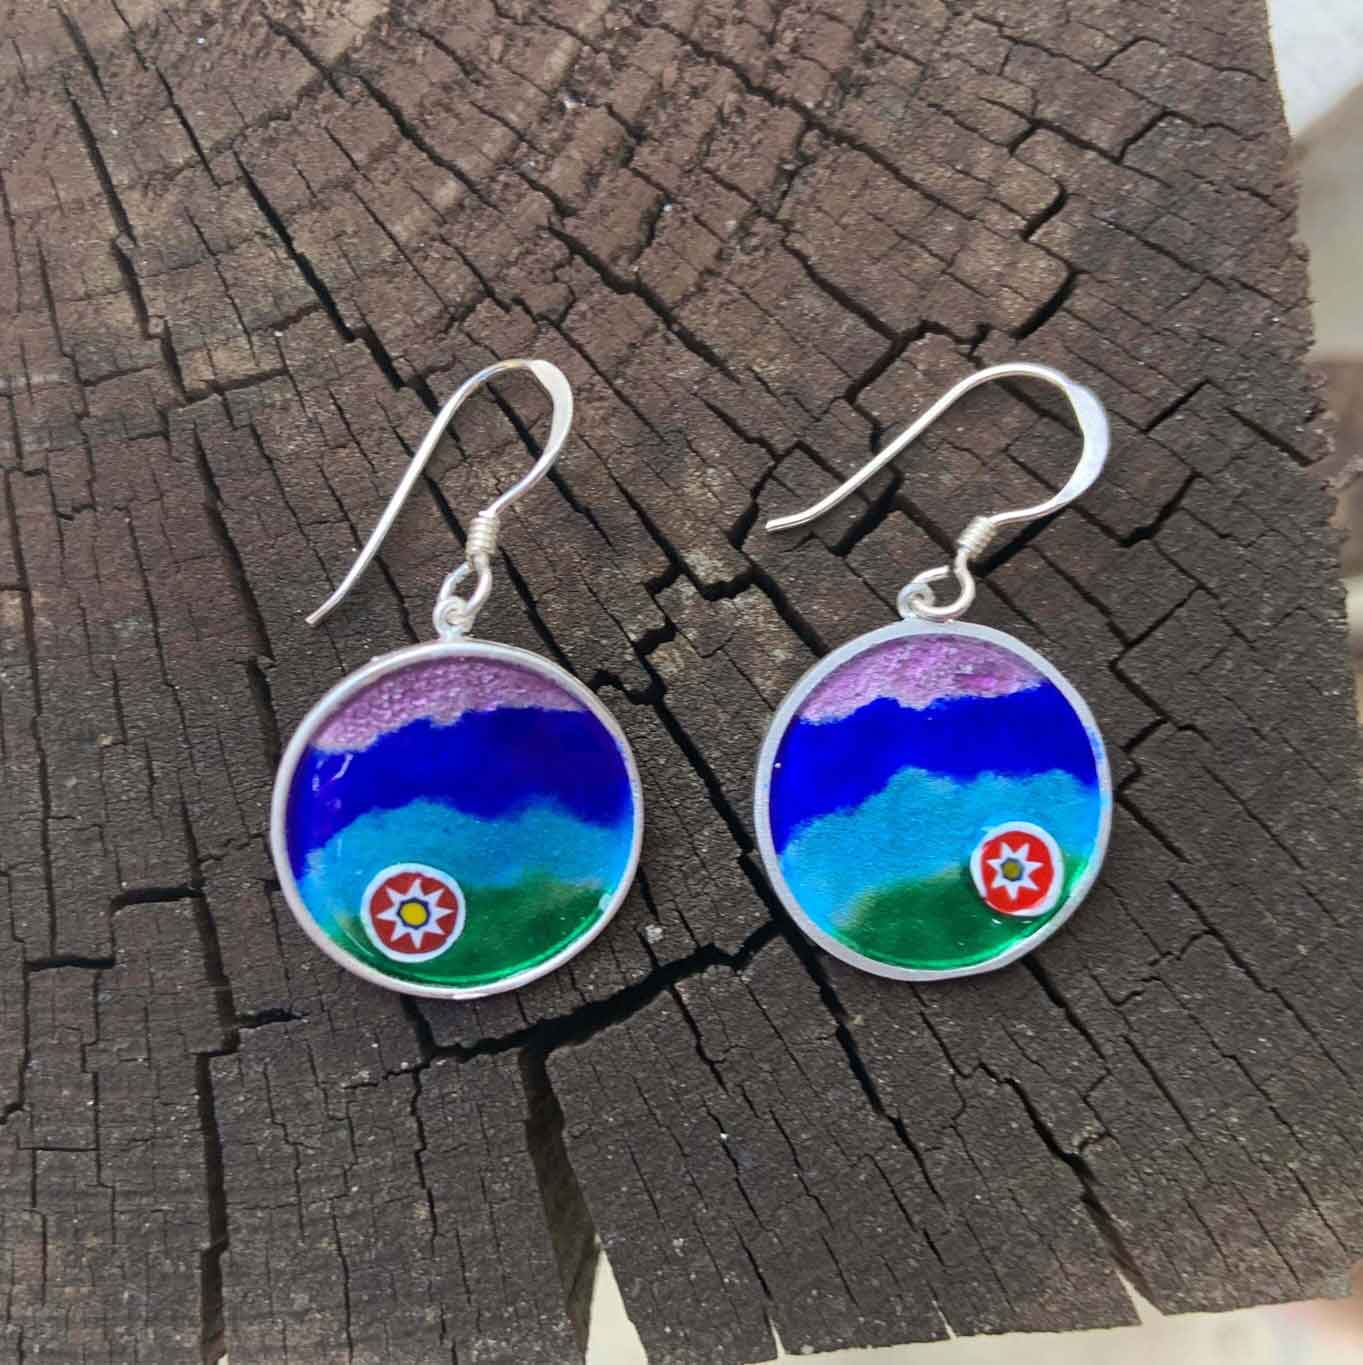 CLOISONNE ENAMEL SILVER Handmade Jewelry Set, Sea and Star Necklace and Earrings, Gift for Mom, Love Jewelry, 925 Sterling Silver